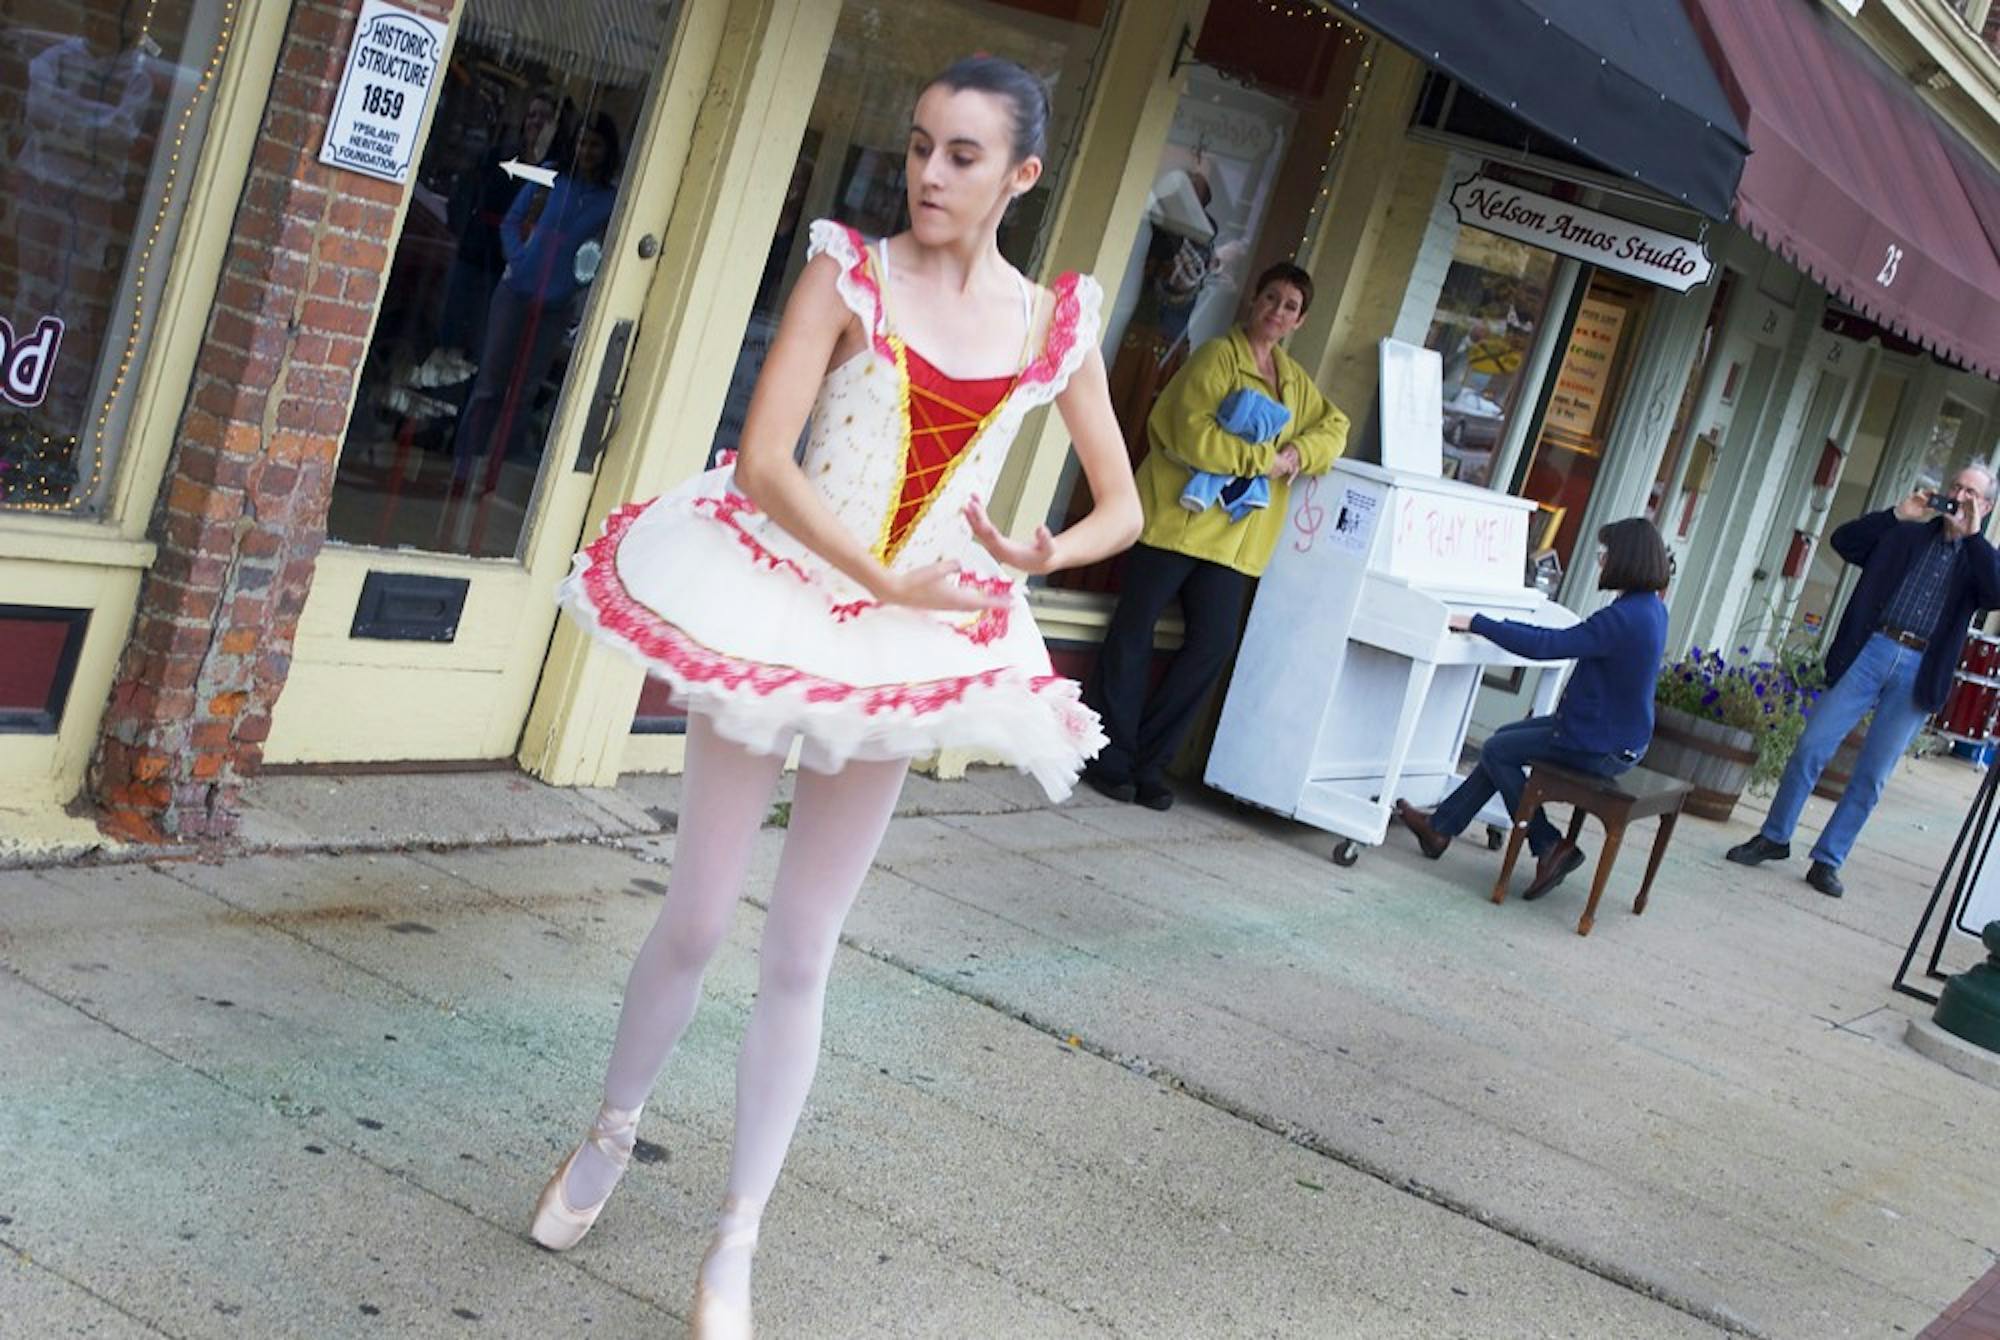 Ballerina Nicasia Marie performs en-pointe for the entranced crowd as Pianos ‘Round Town creator Korin Hancherlian-Amos plays piano Saturday in Depot Town. The event will continue until October 11.